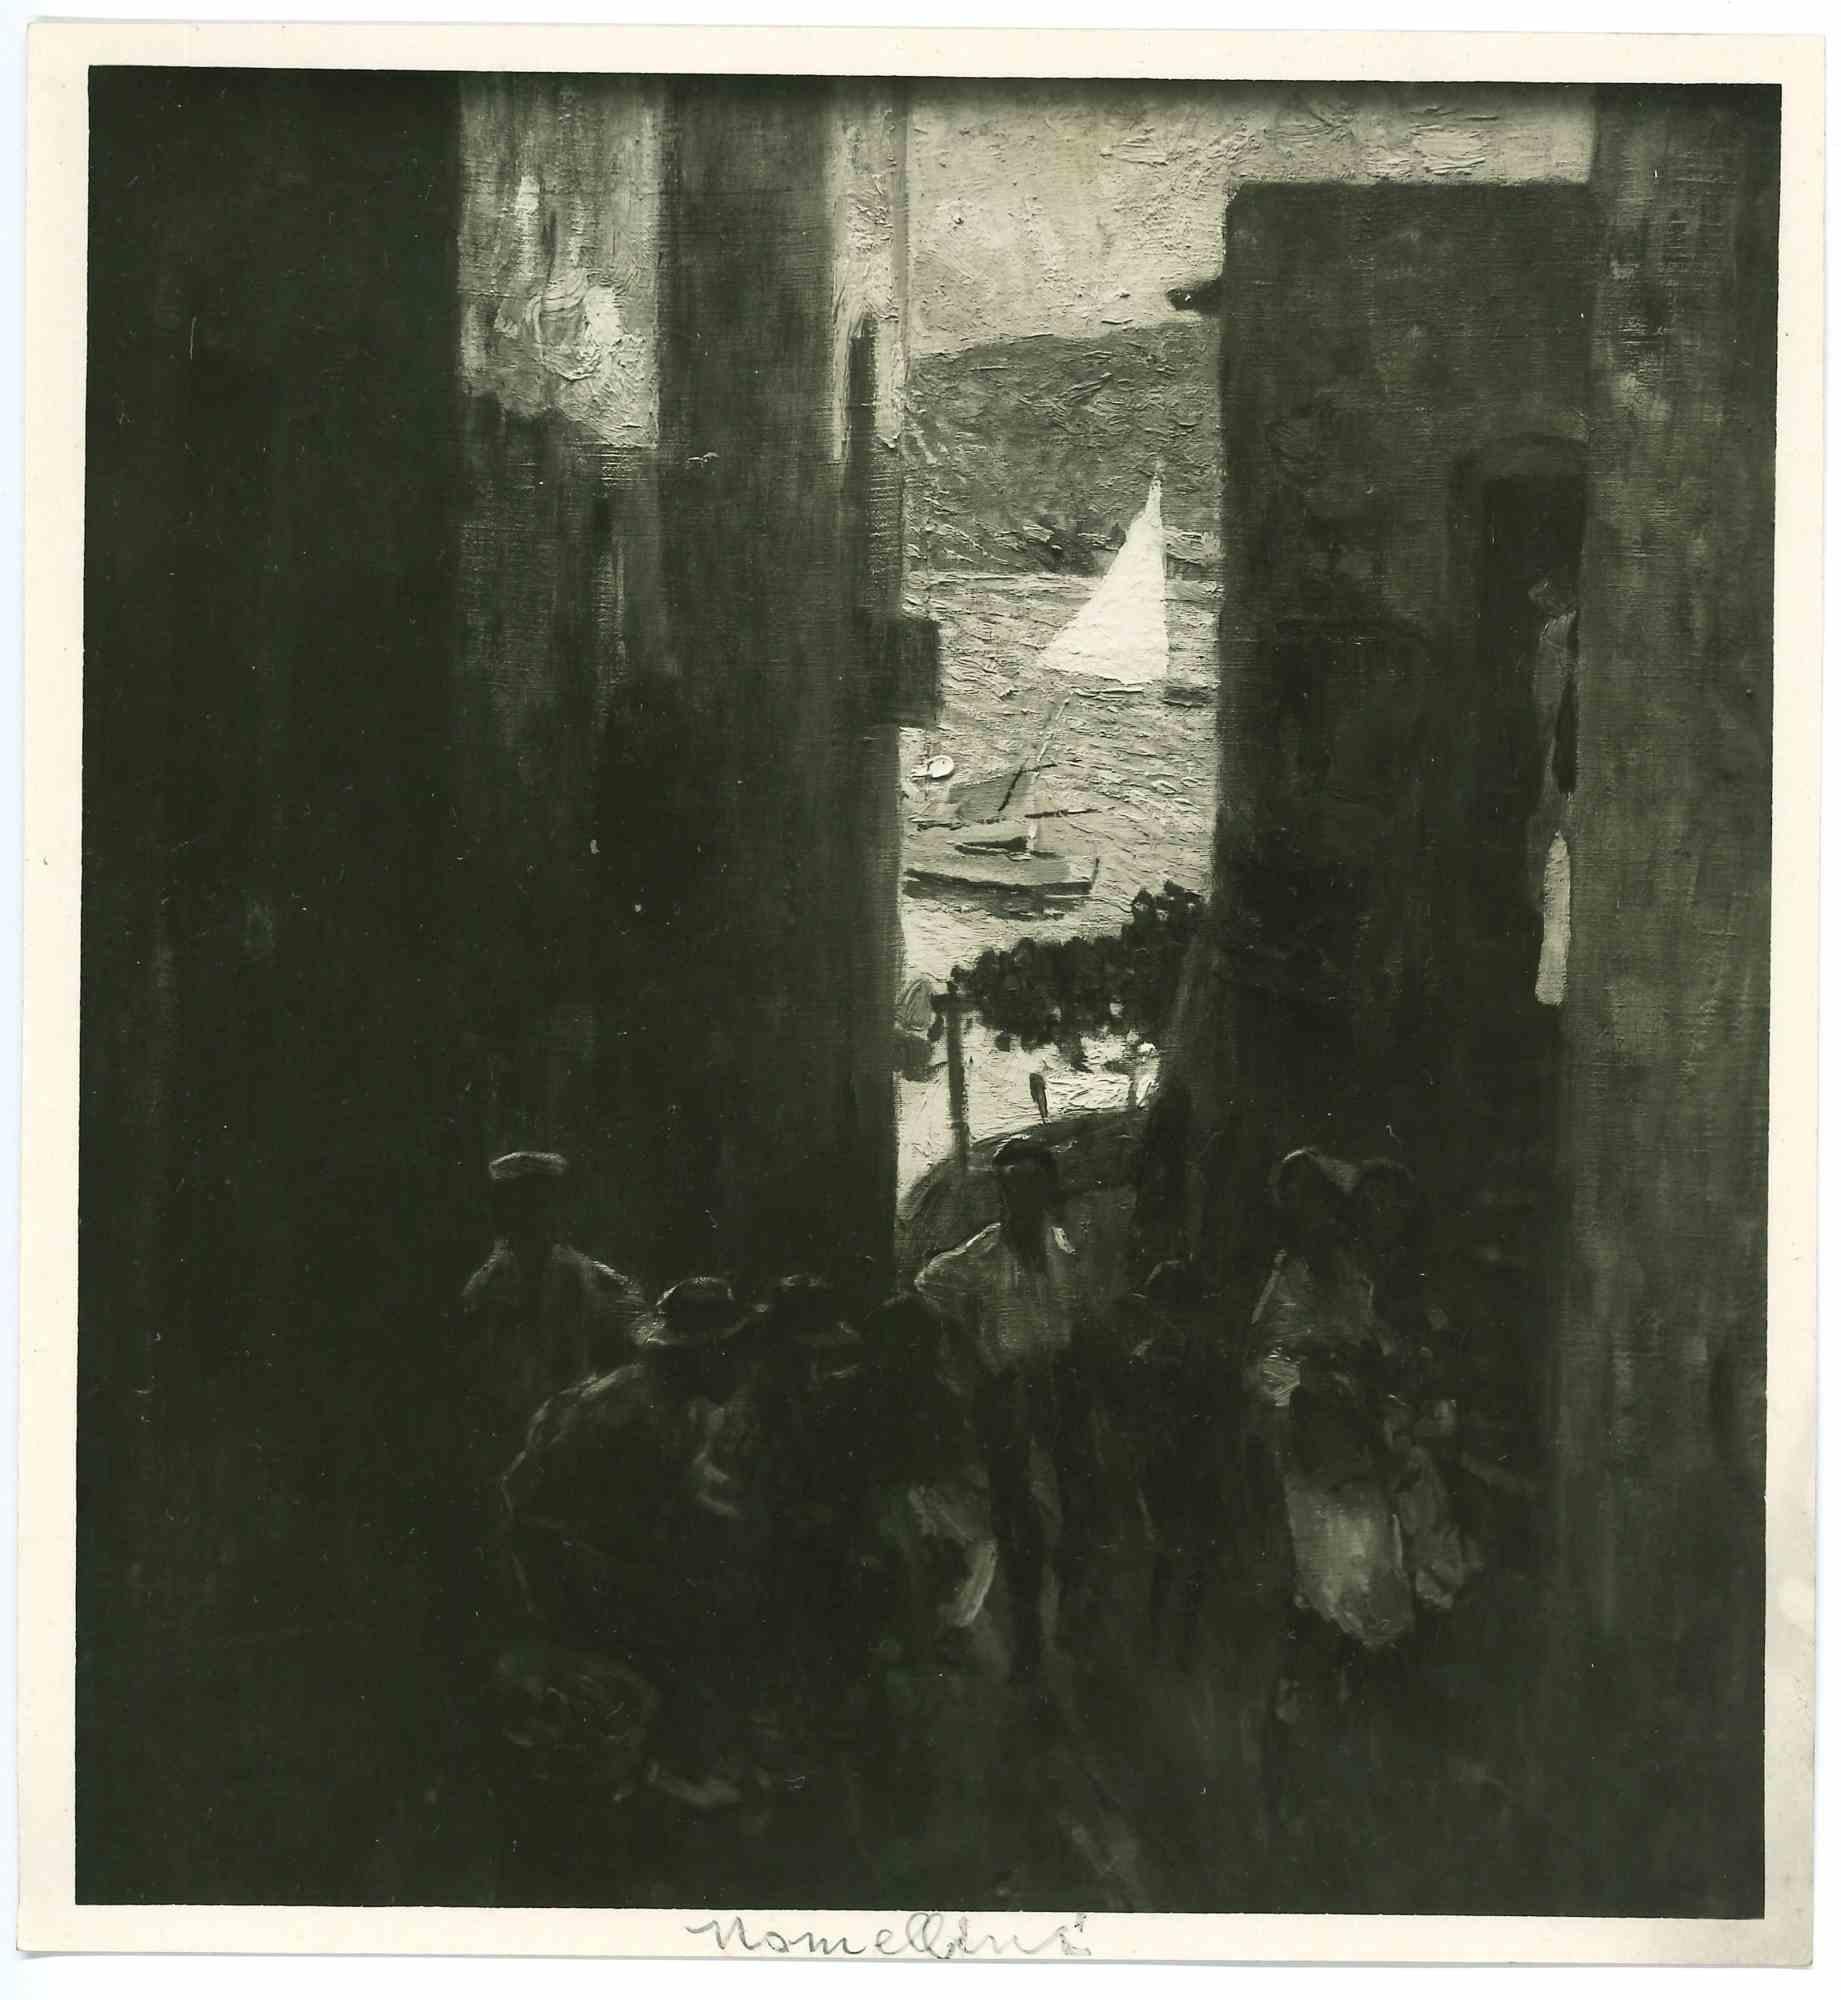 Unknown Figurative Photograph - Vintage Photo of Painting by Plinio Nomellini- The Boat - Early 20th Century